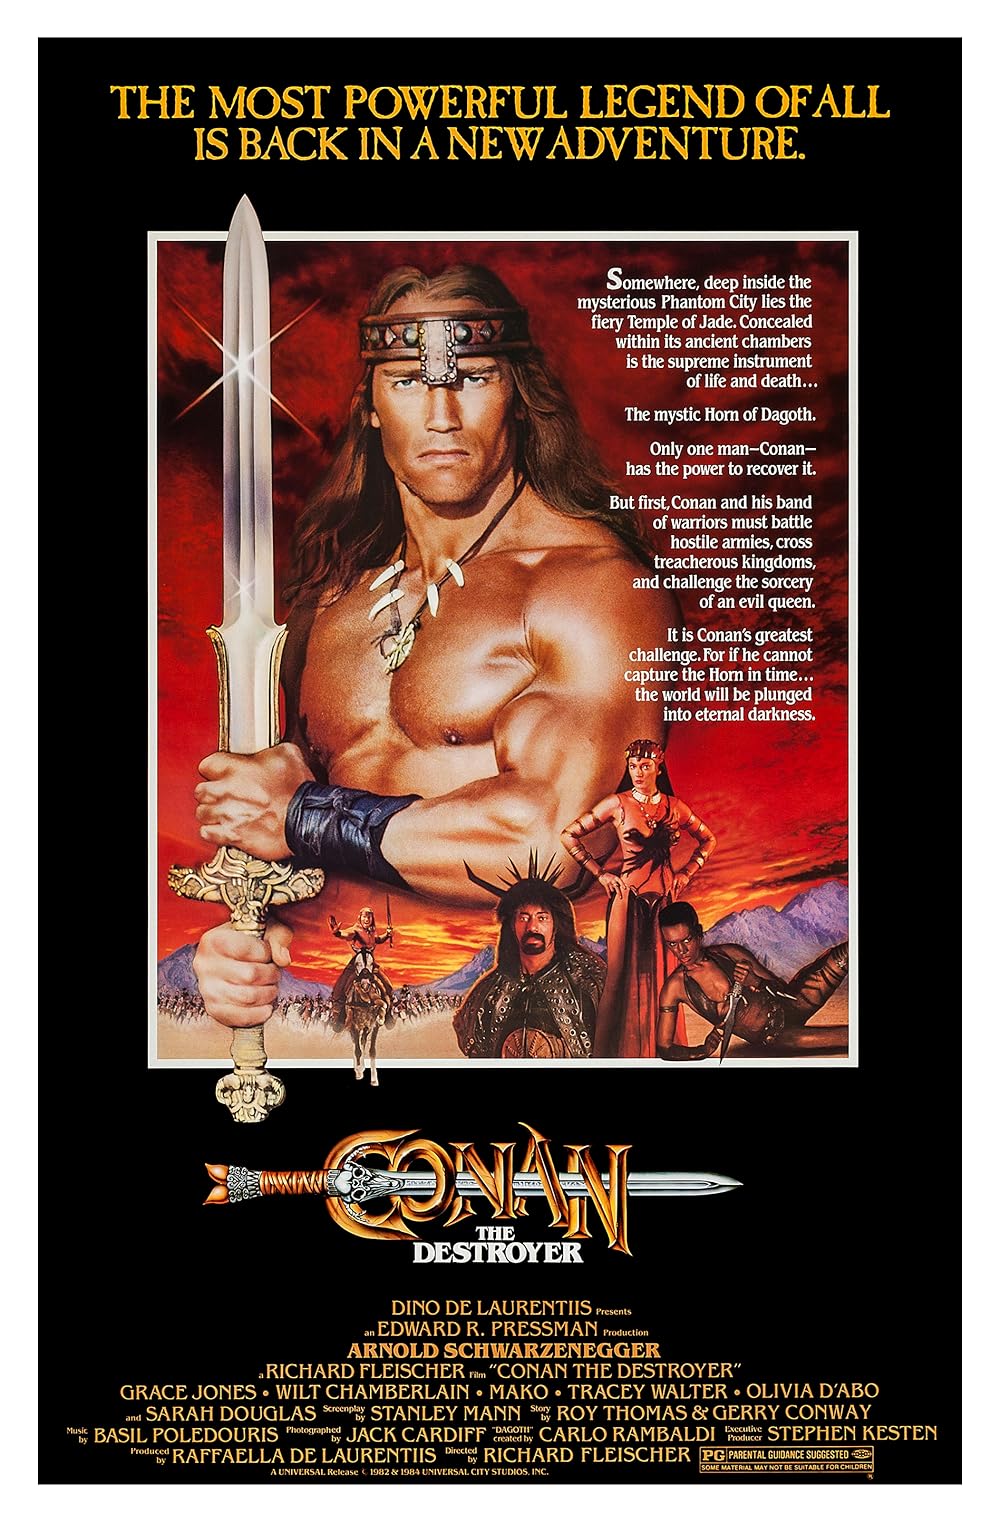 bheng alcano recommends conan the destroyer download pic